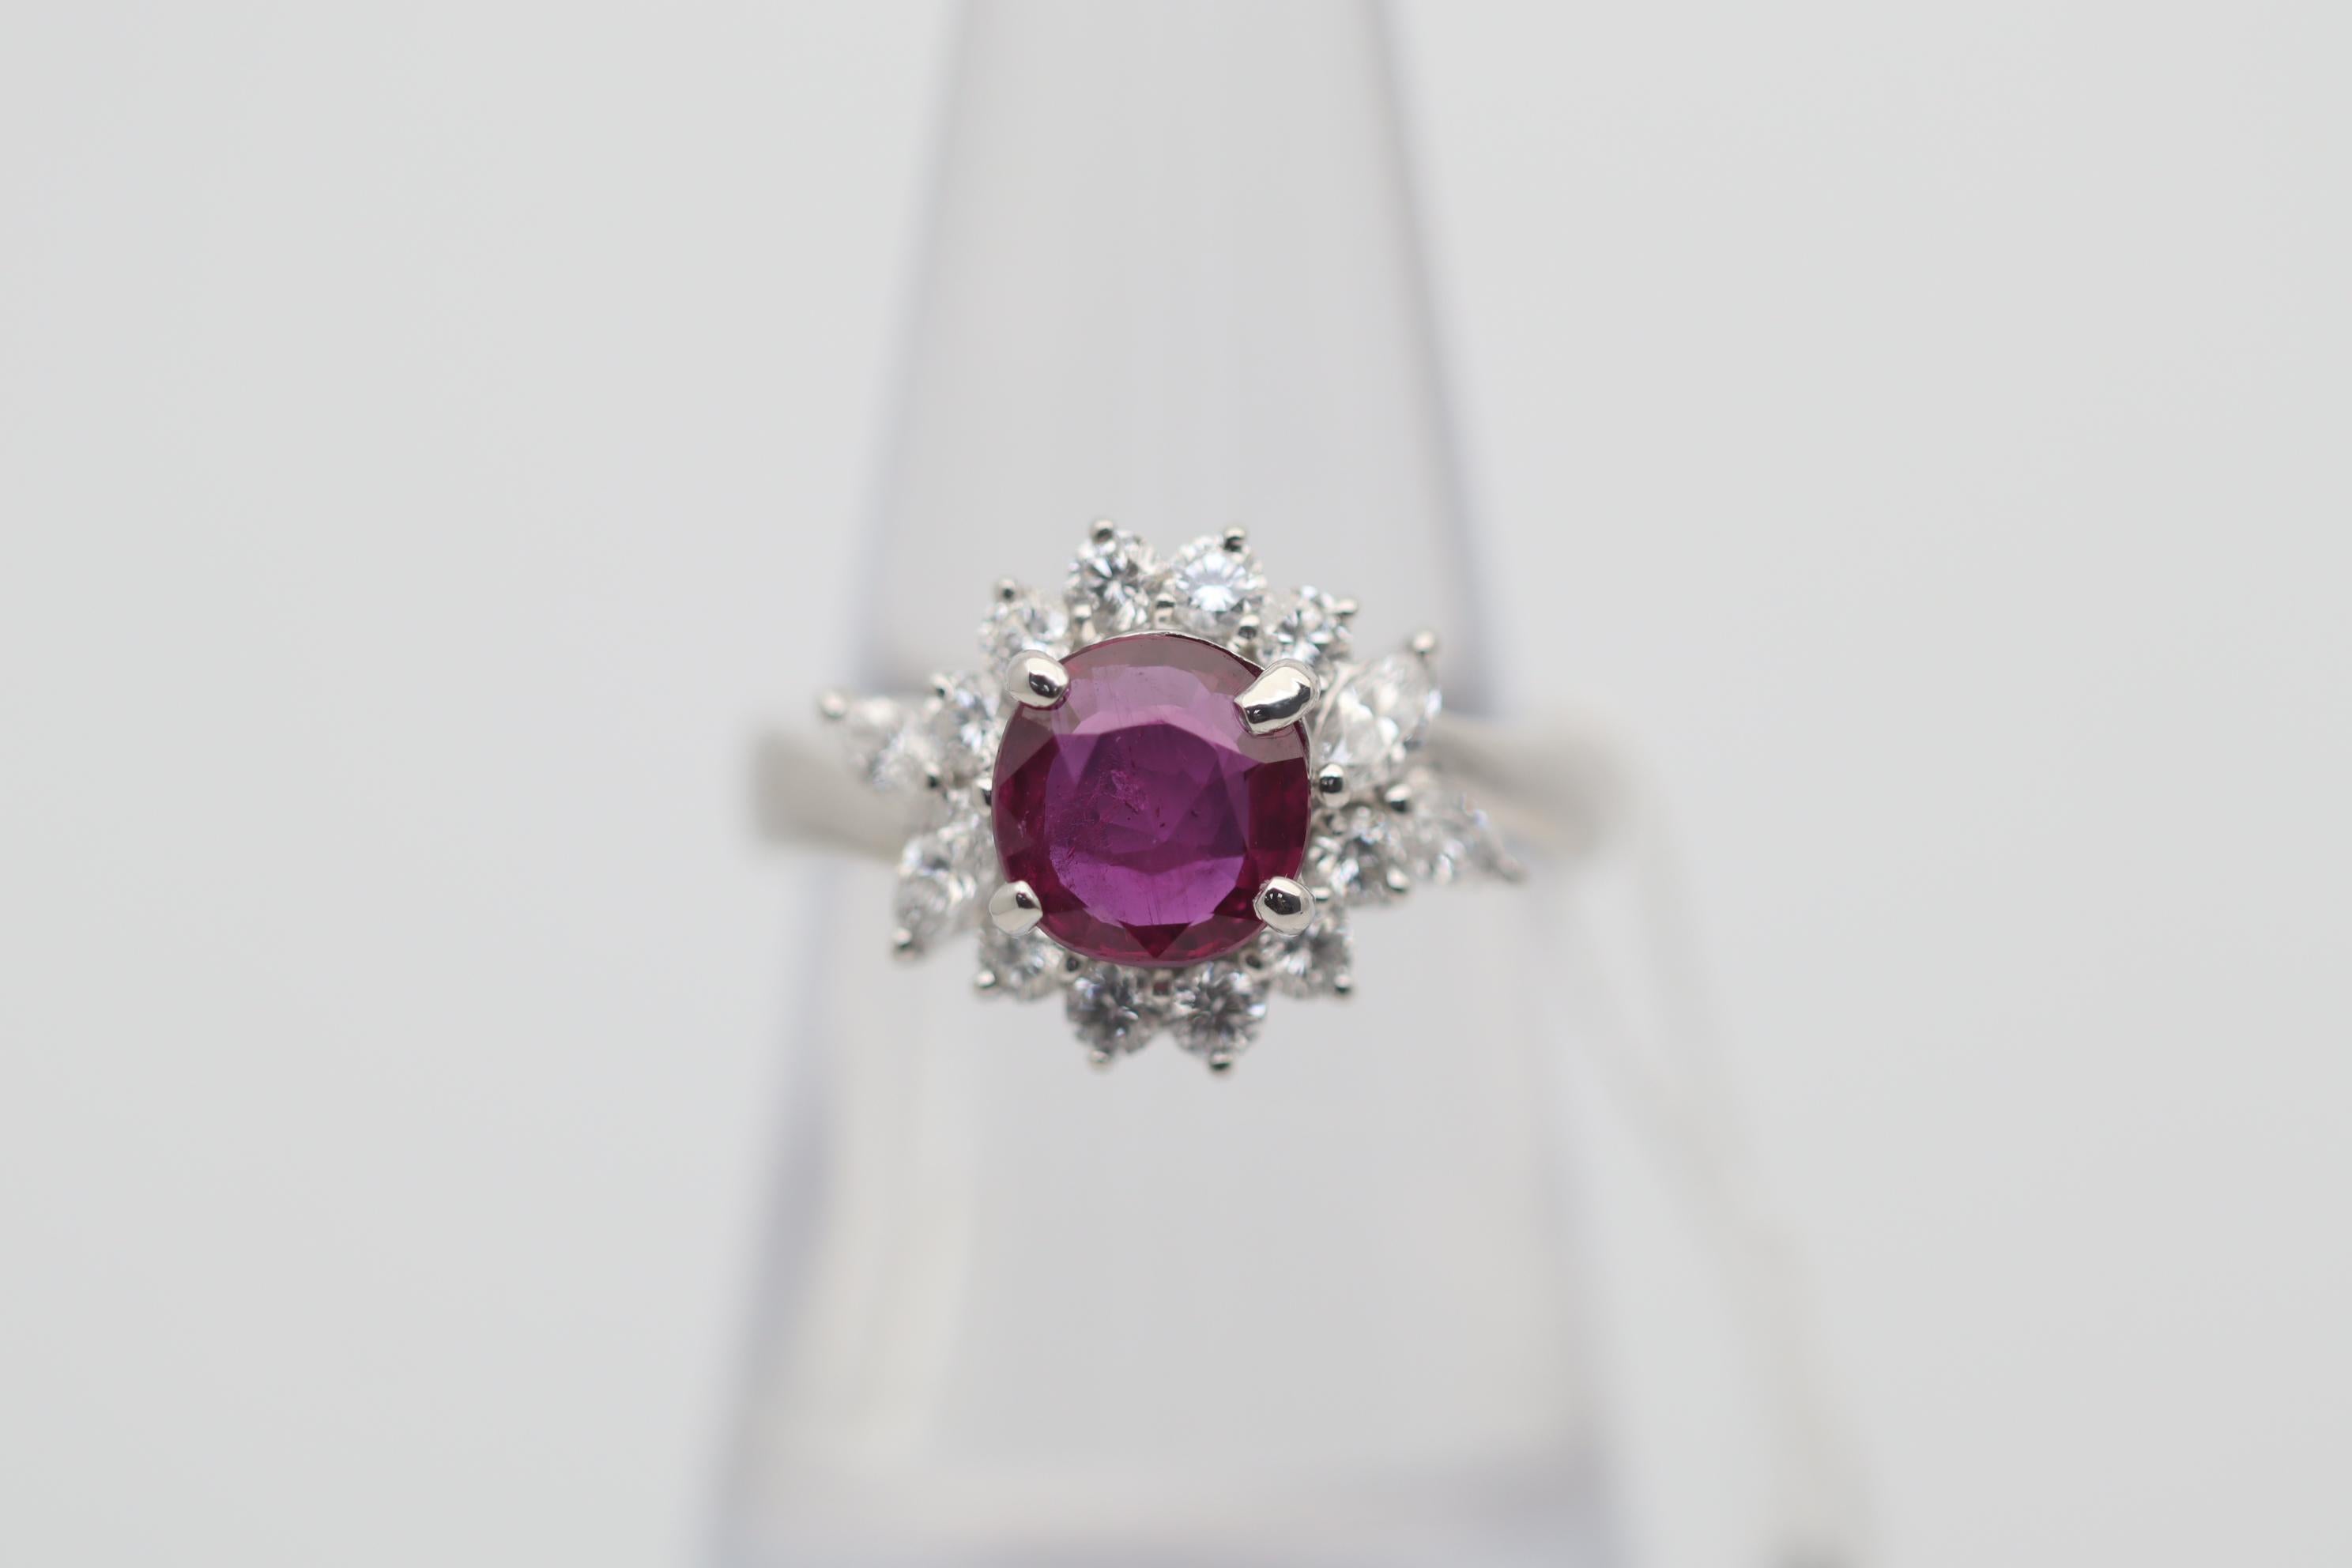 An elegant and stylish ring featuring a fine ruby weighing 1.54 carats. It is cushion-shaped and has a rich red color and a brilliant crystal. It is accented by 0.67 carats of round brilliant and marquise-shape diamonds set around the ruby in a